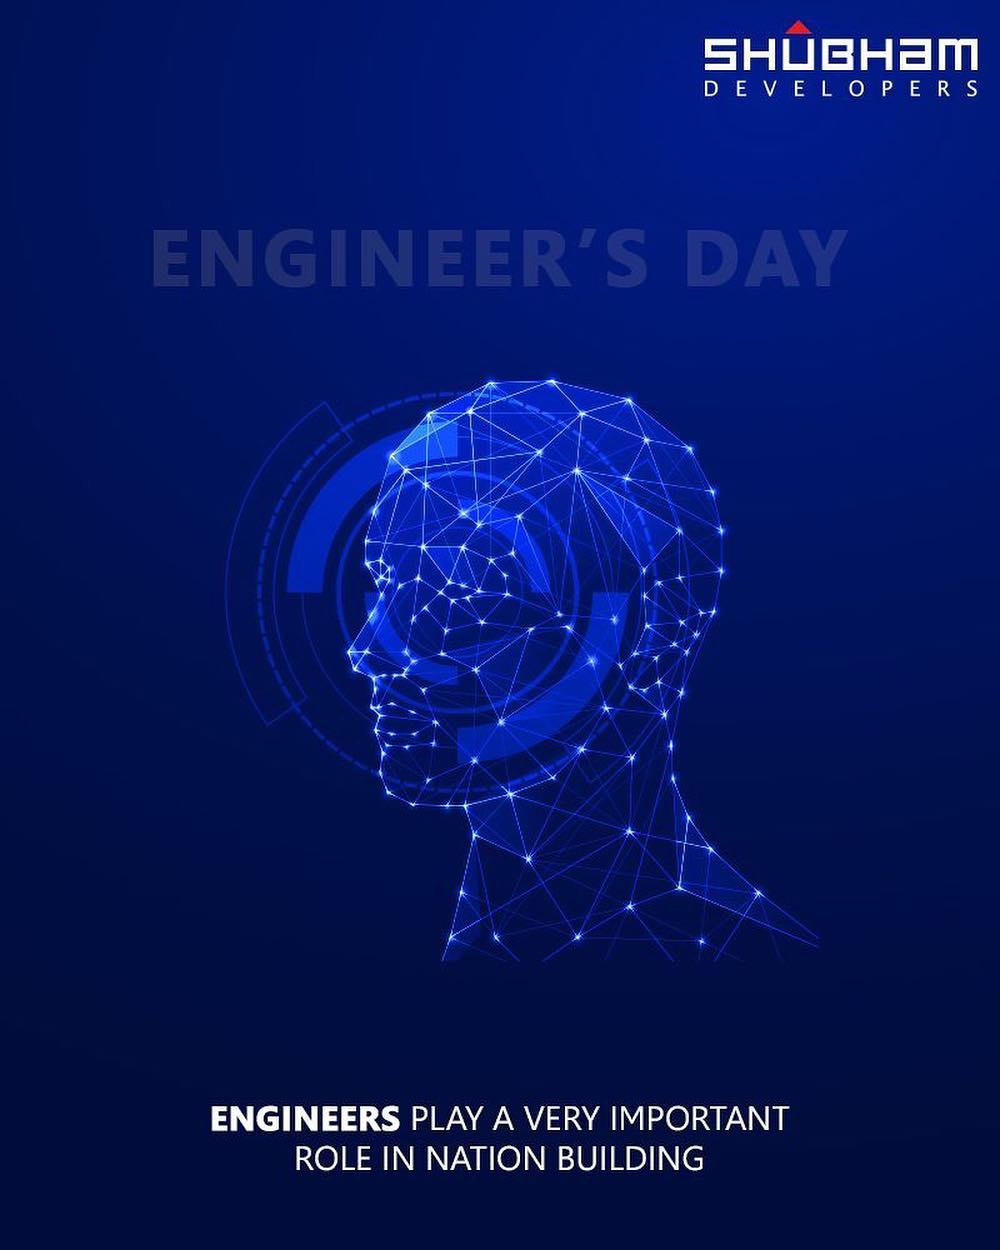 Engineers play a very important role in nation building.

#EngineersDay #ShubhamDevelopers #RealEstate